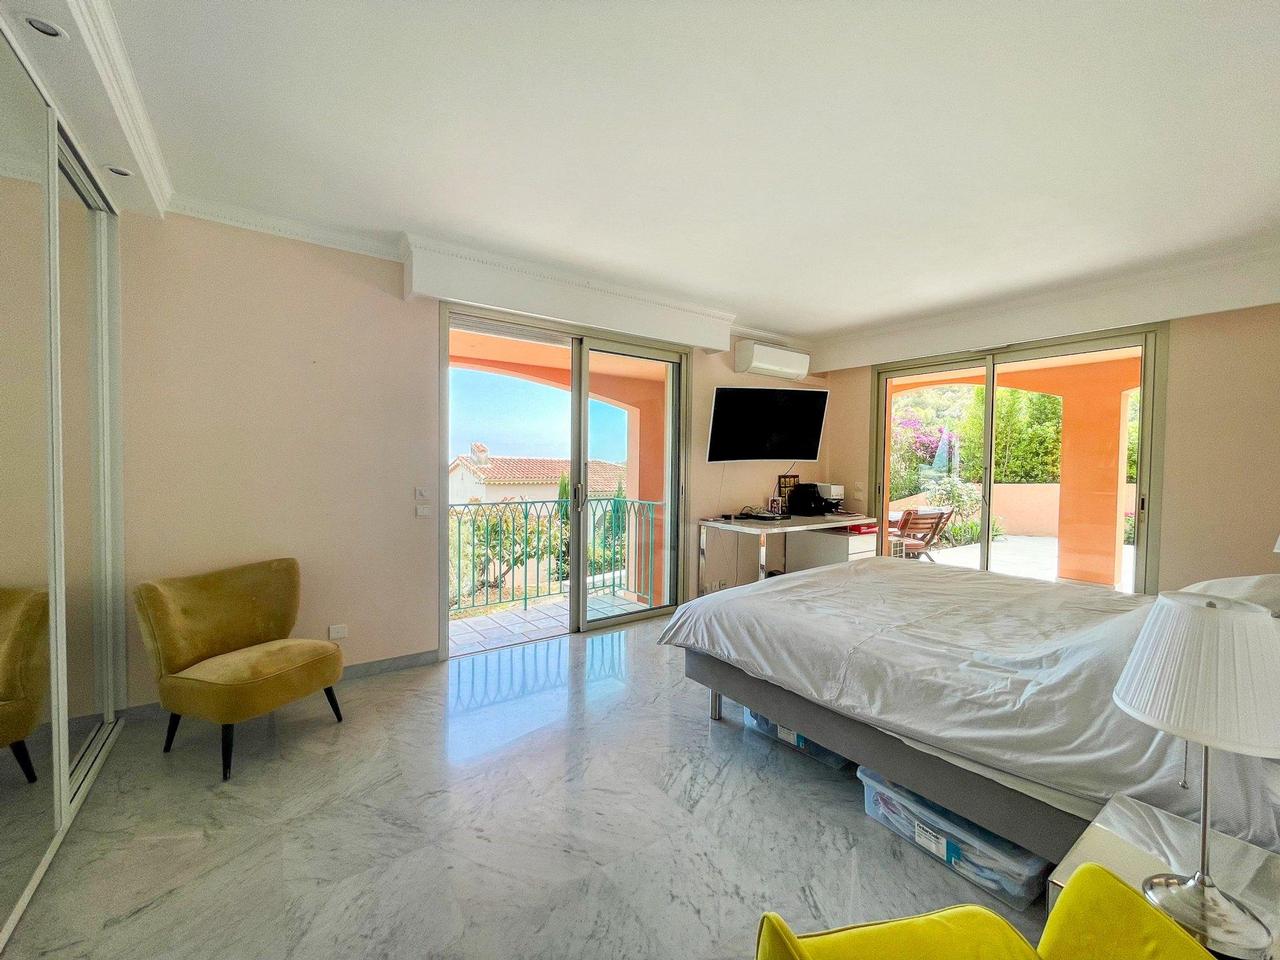 Nice Riviera - Agence Immobiliére Nice Côte d'Azur|House 5 Rooms 150m2 for sale 1,680,000 €